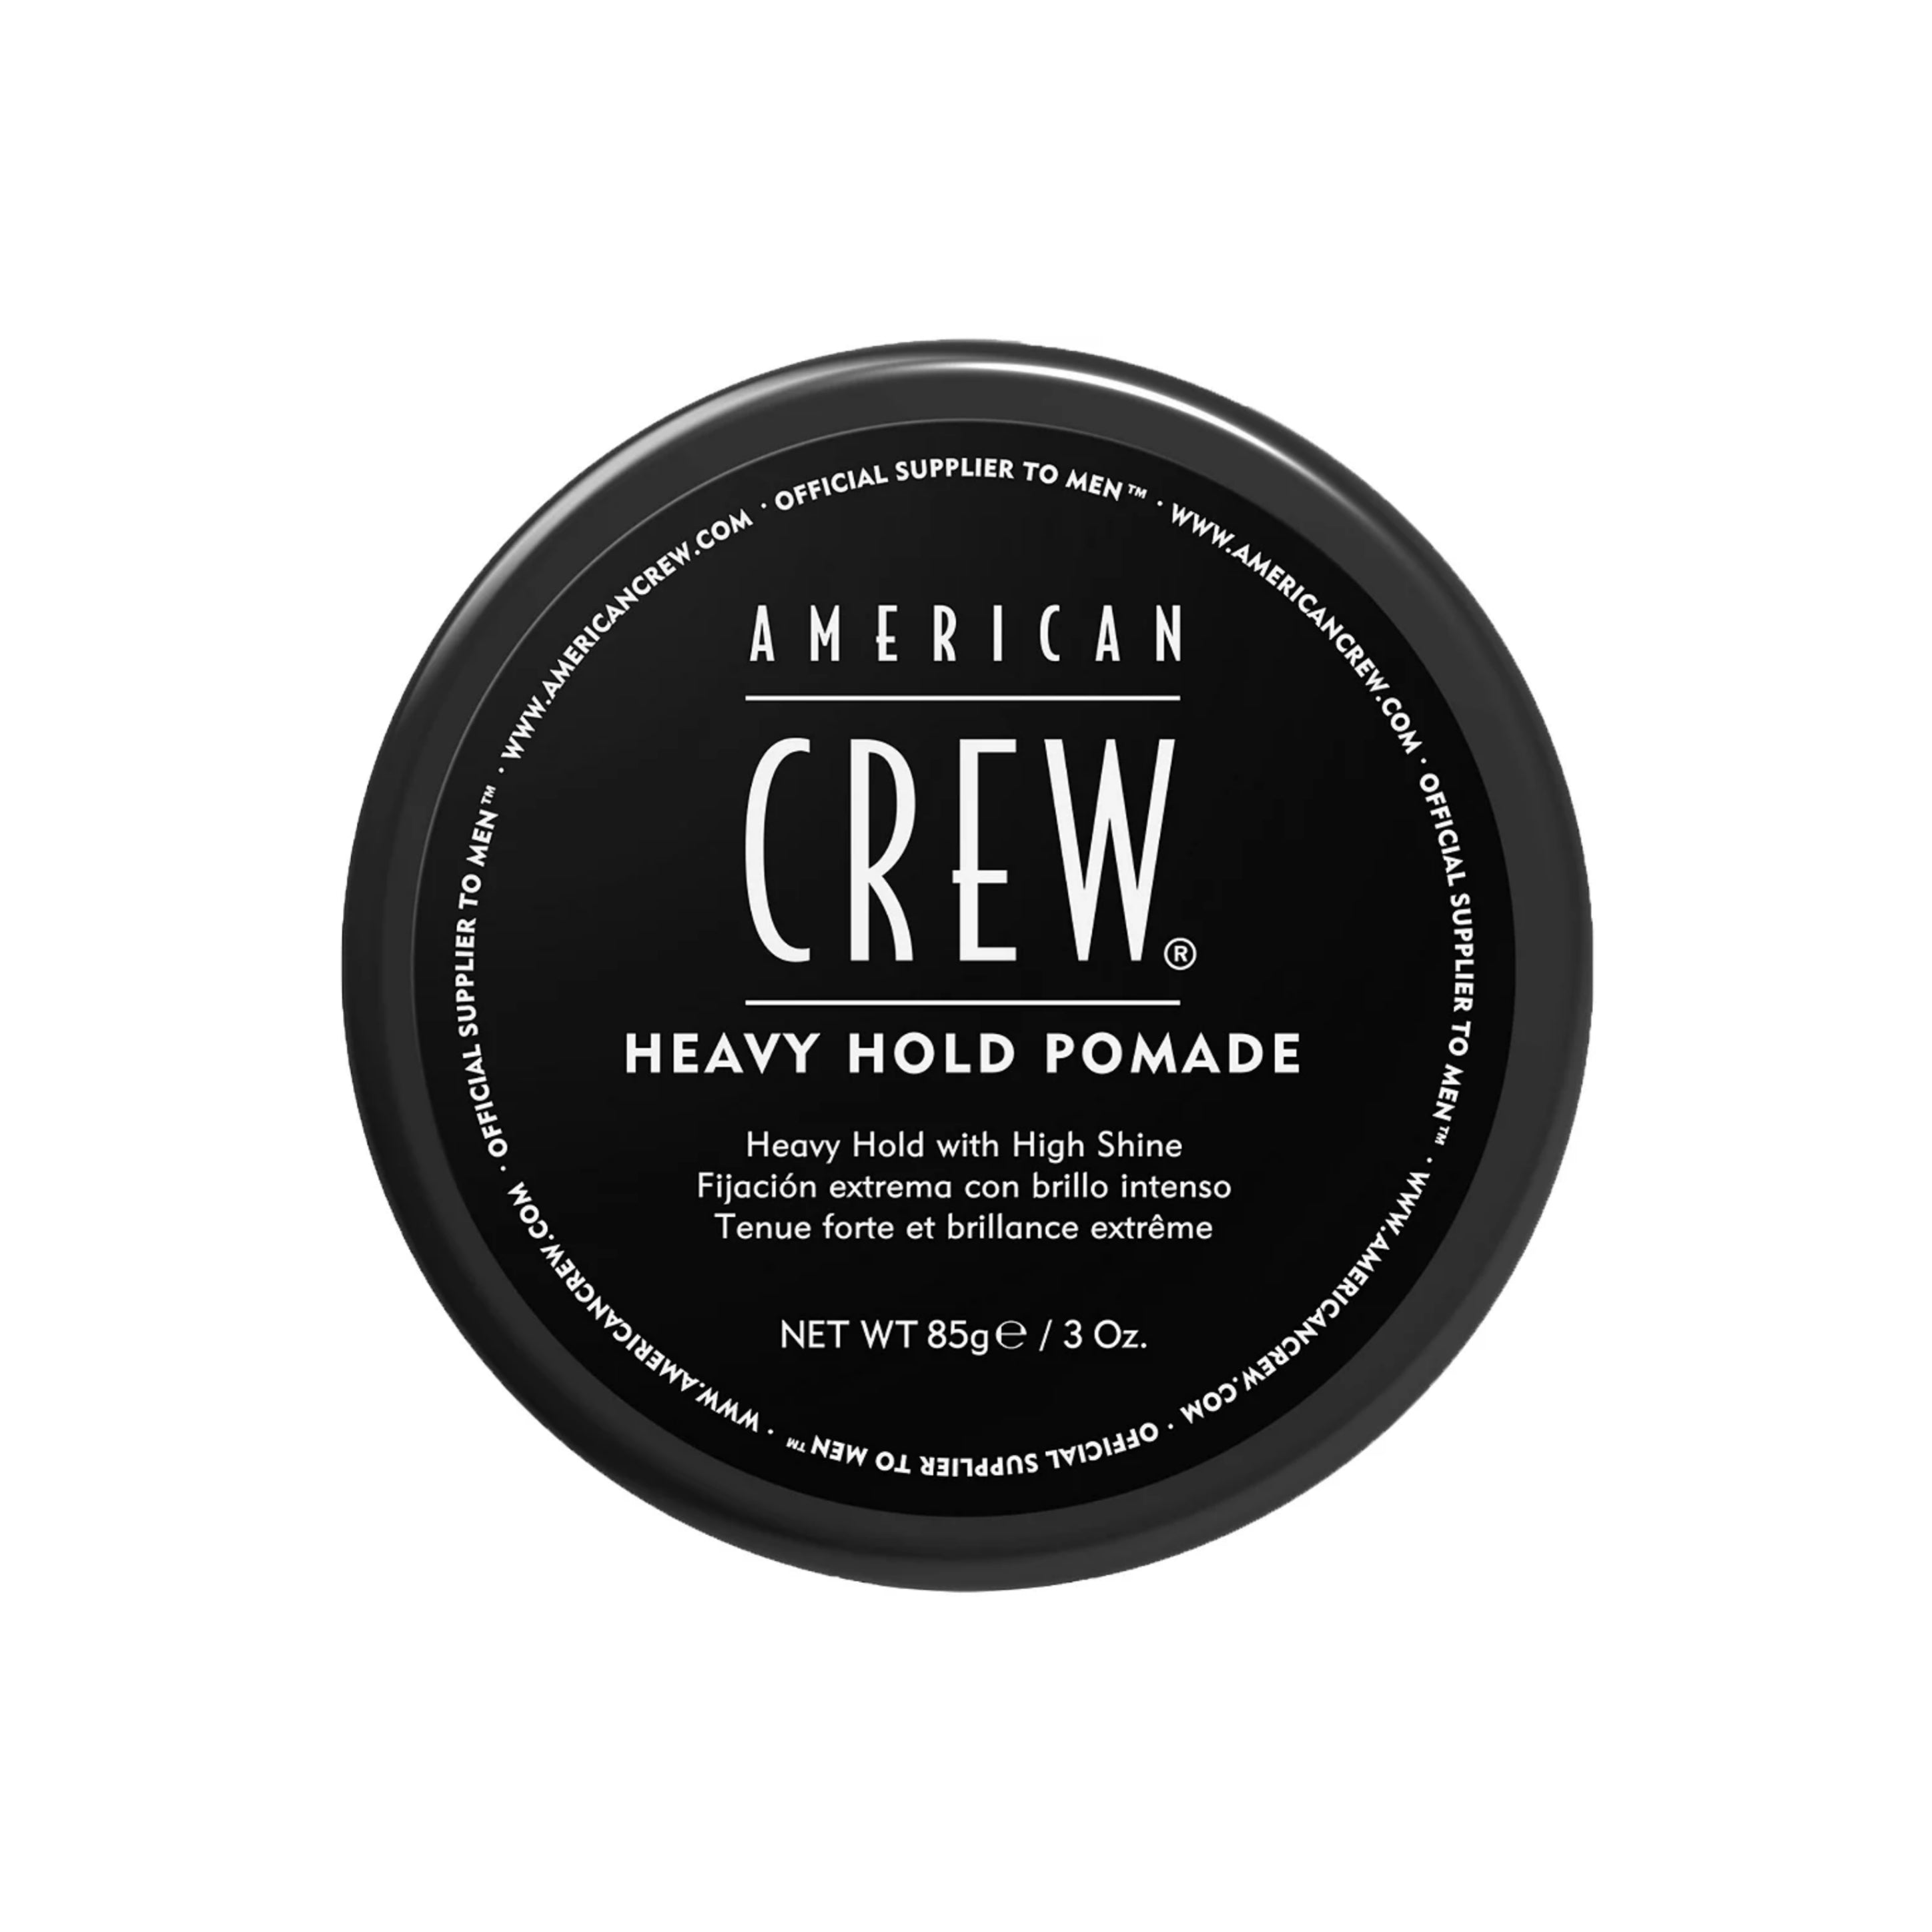 American Crew Heavy Hold Pomade 3oz / 85g